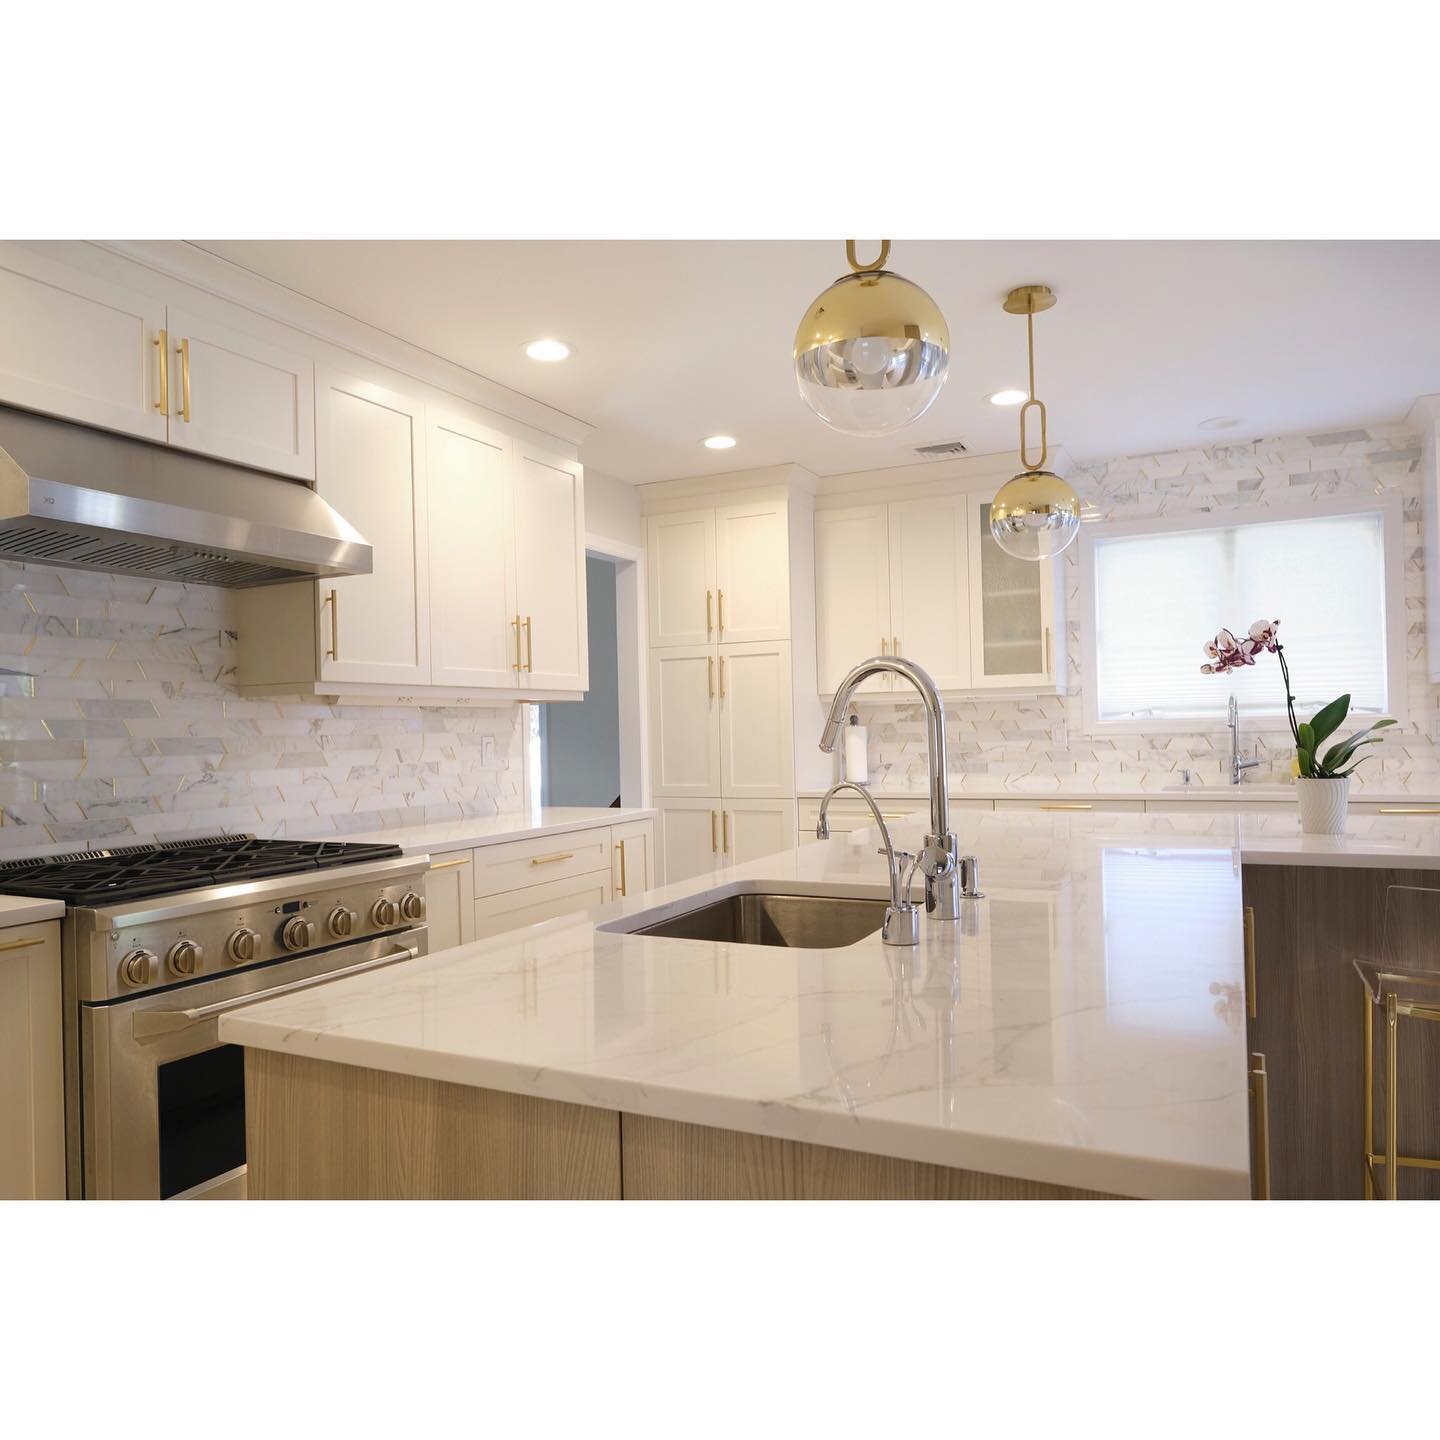 🌟Luminous white and gold kitchen 🌟with beautiful stainless steal appliances and lucite details. Photo by @aneyeforart 
&bull;
&bull;
&bull;
#luminous #gold #bright #kitchen #kitchendesign #kitchendecor #stainlesssteel #appliances #lucite #lucitedet